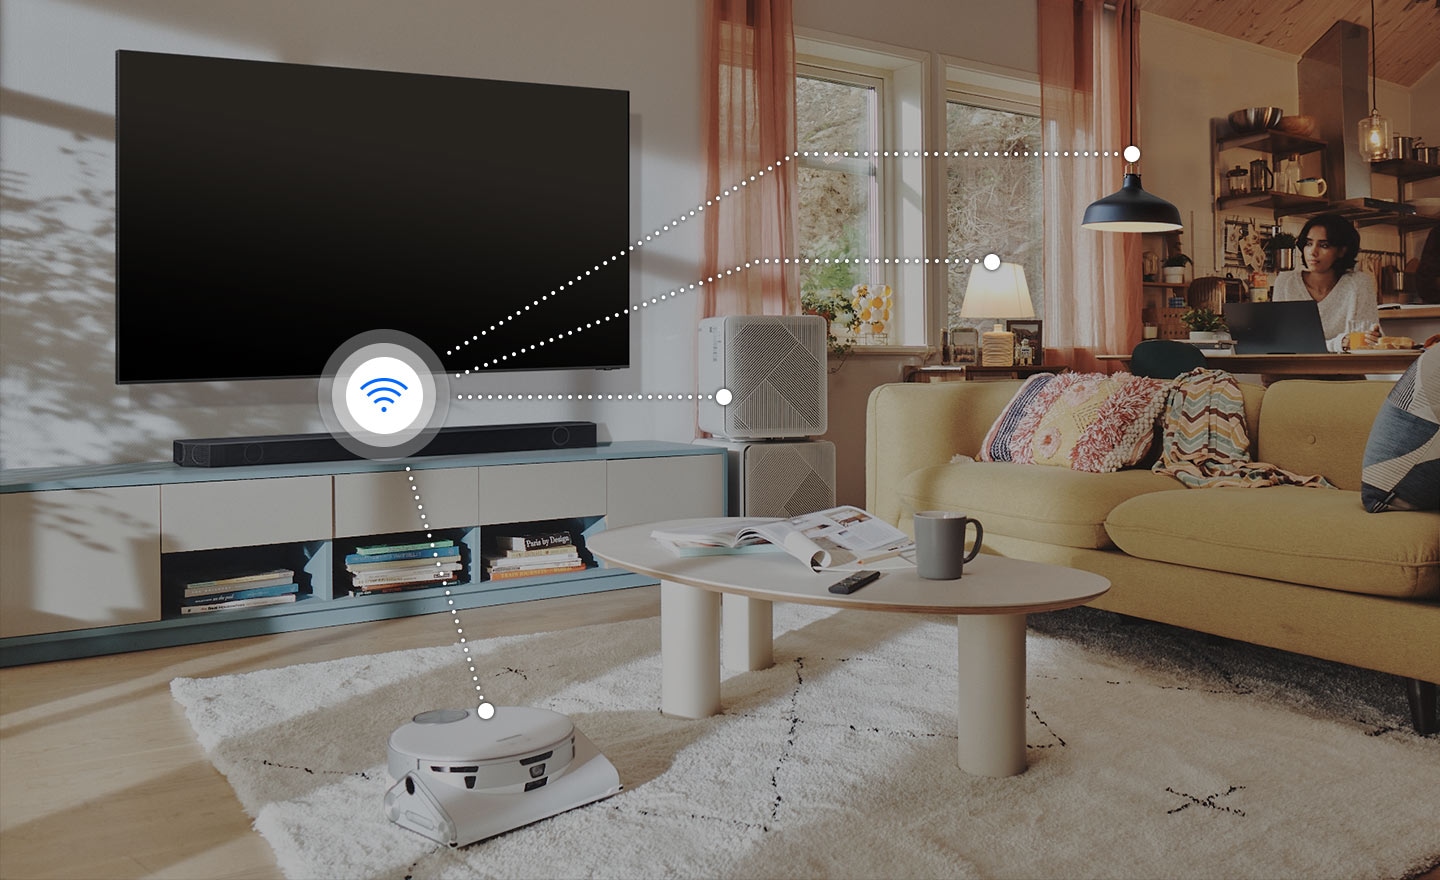 Robot vacuum, air purifier, lamp and a light fixture are connected wirelessly to Samsung Soundbar.